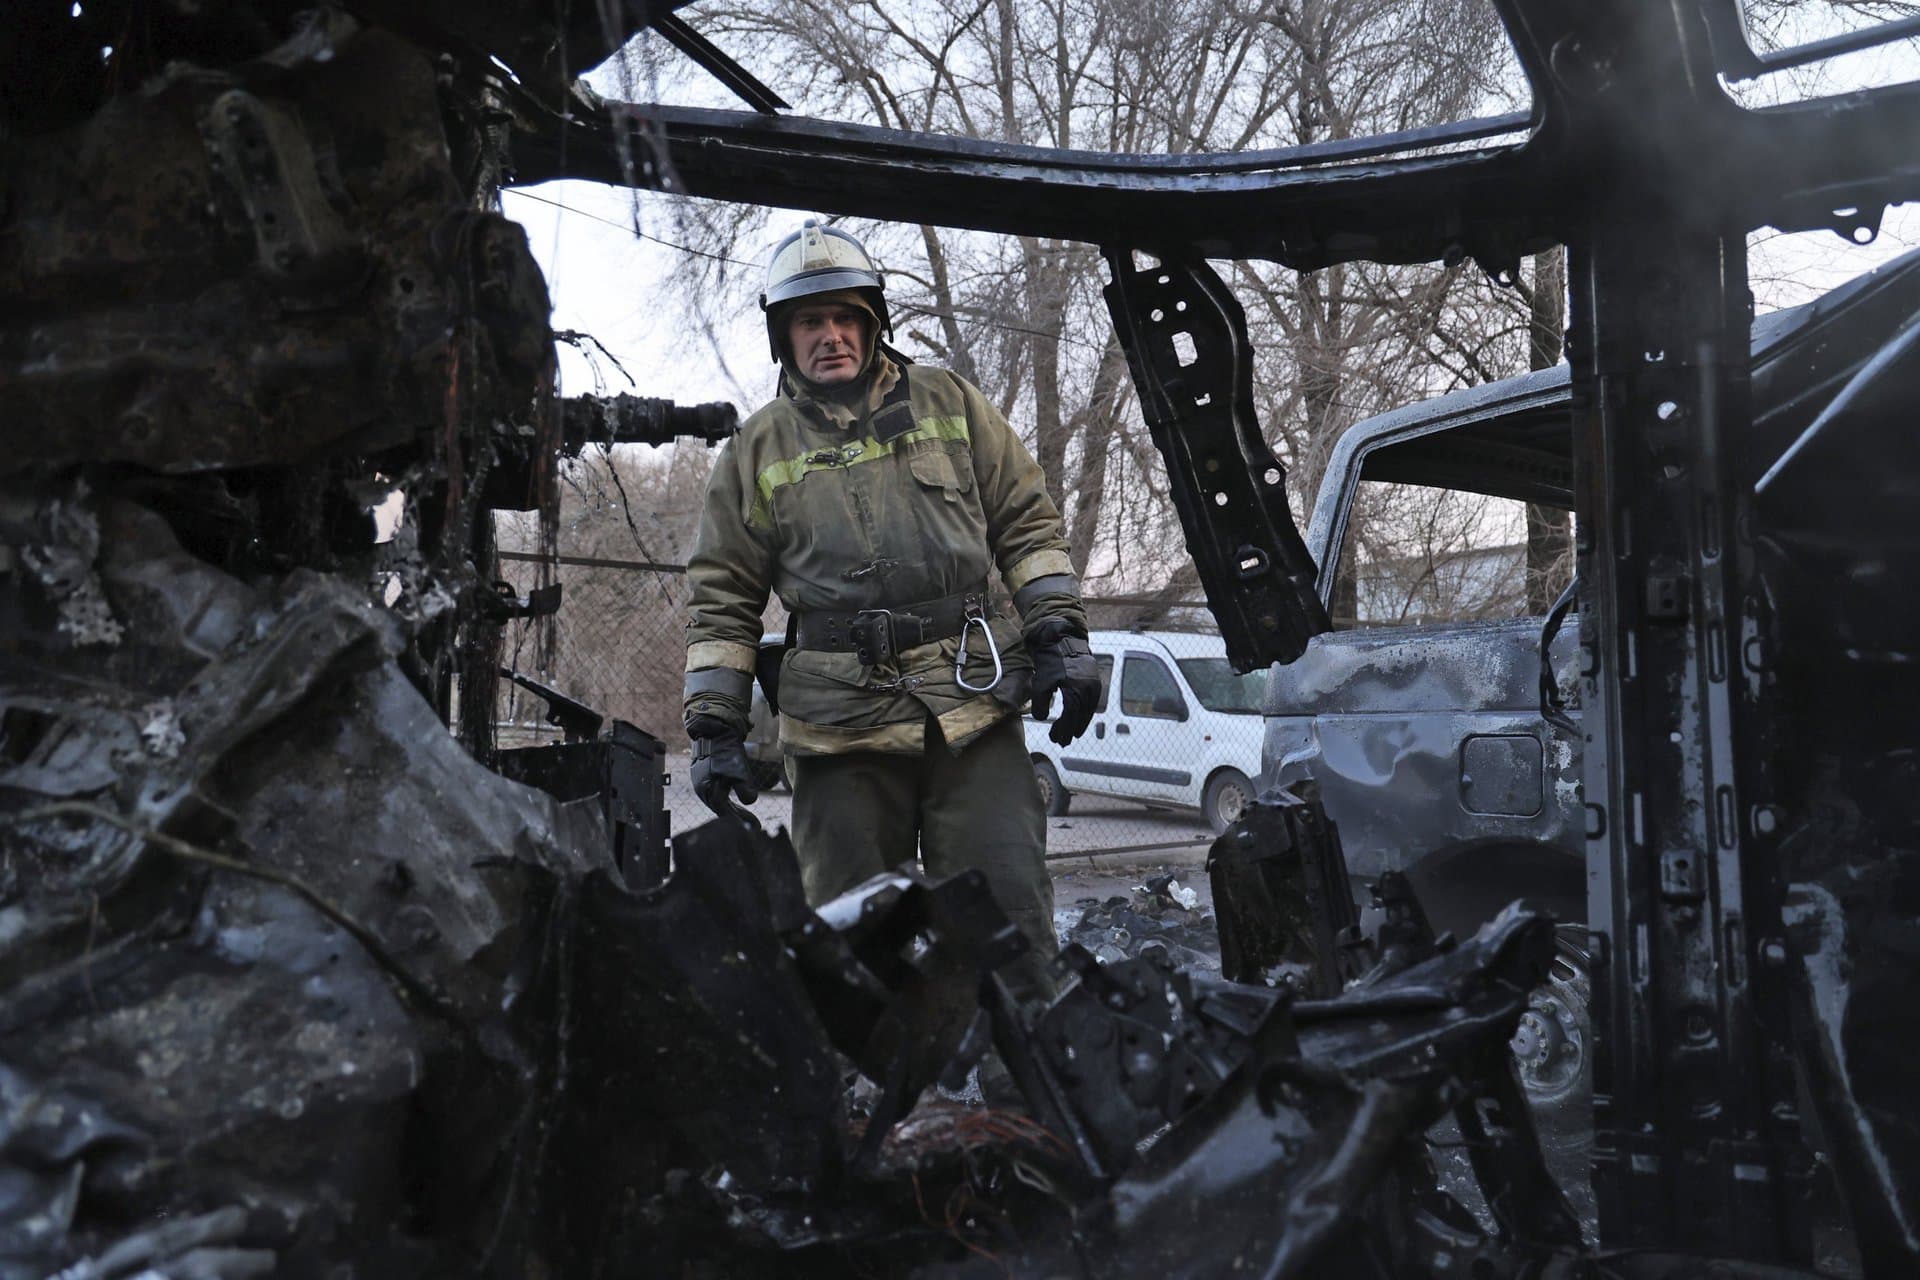 A firefighter examines a burned car in Donetsk